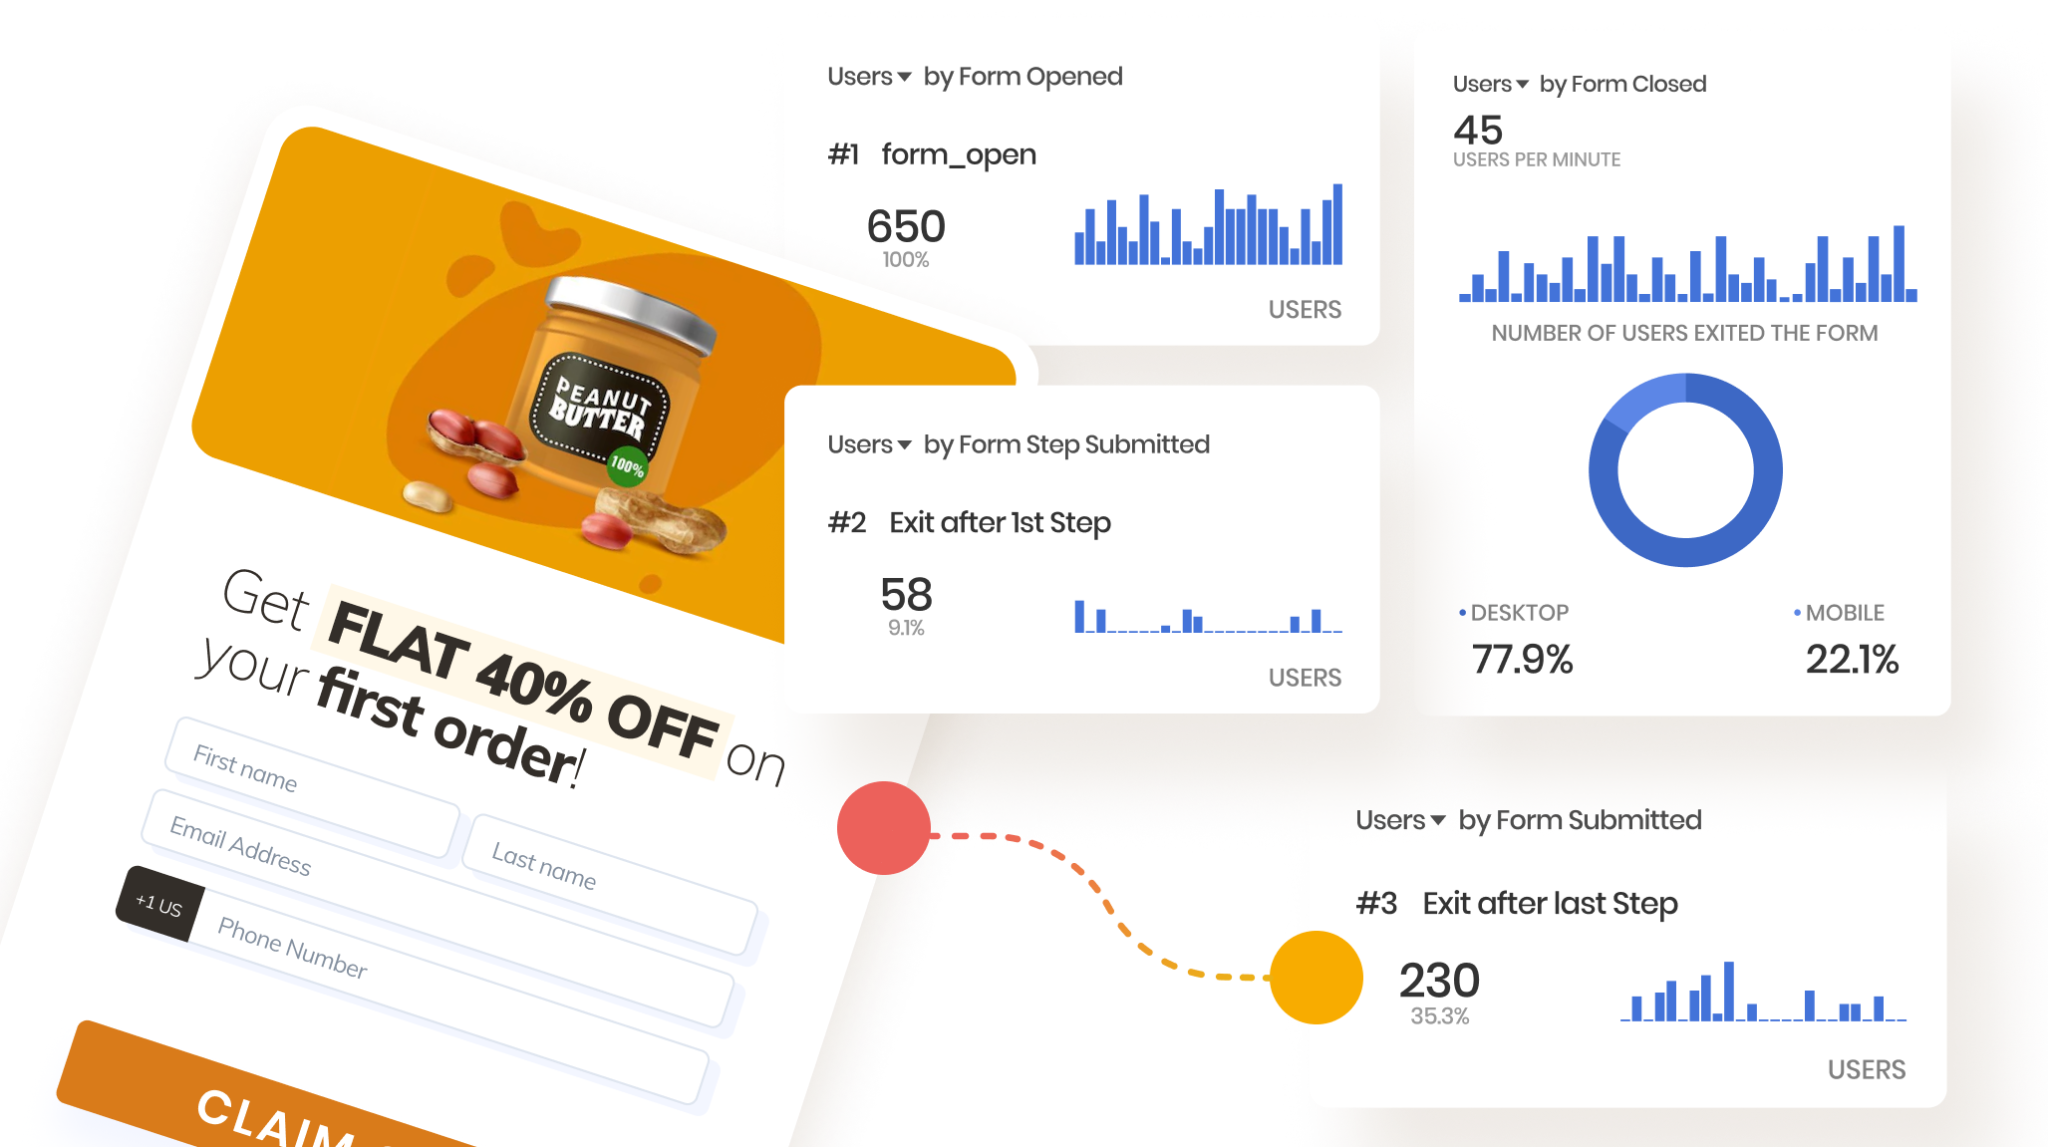 product-update: Contlo Forms are now GA4 ready, Keep track of how your visitors behave across all forms within Google Analytics Dashboard